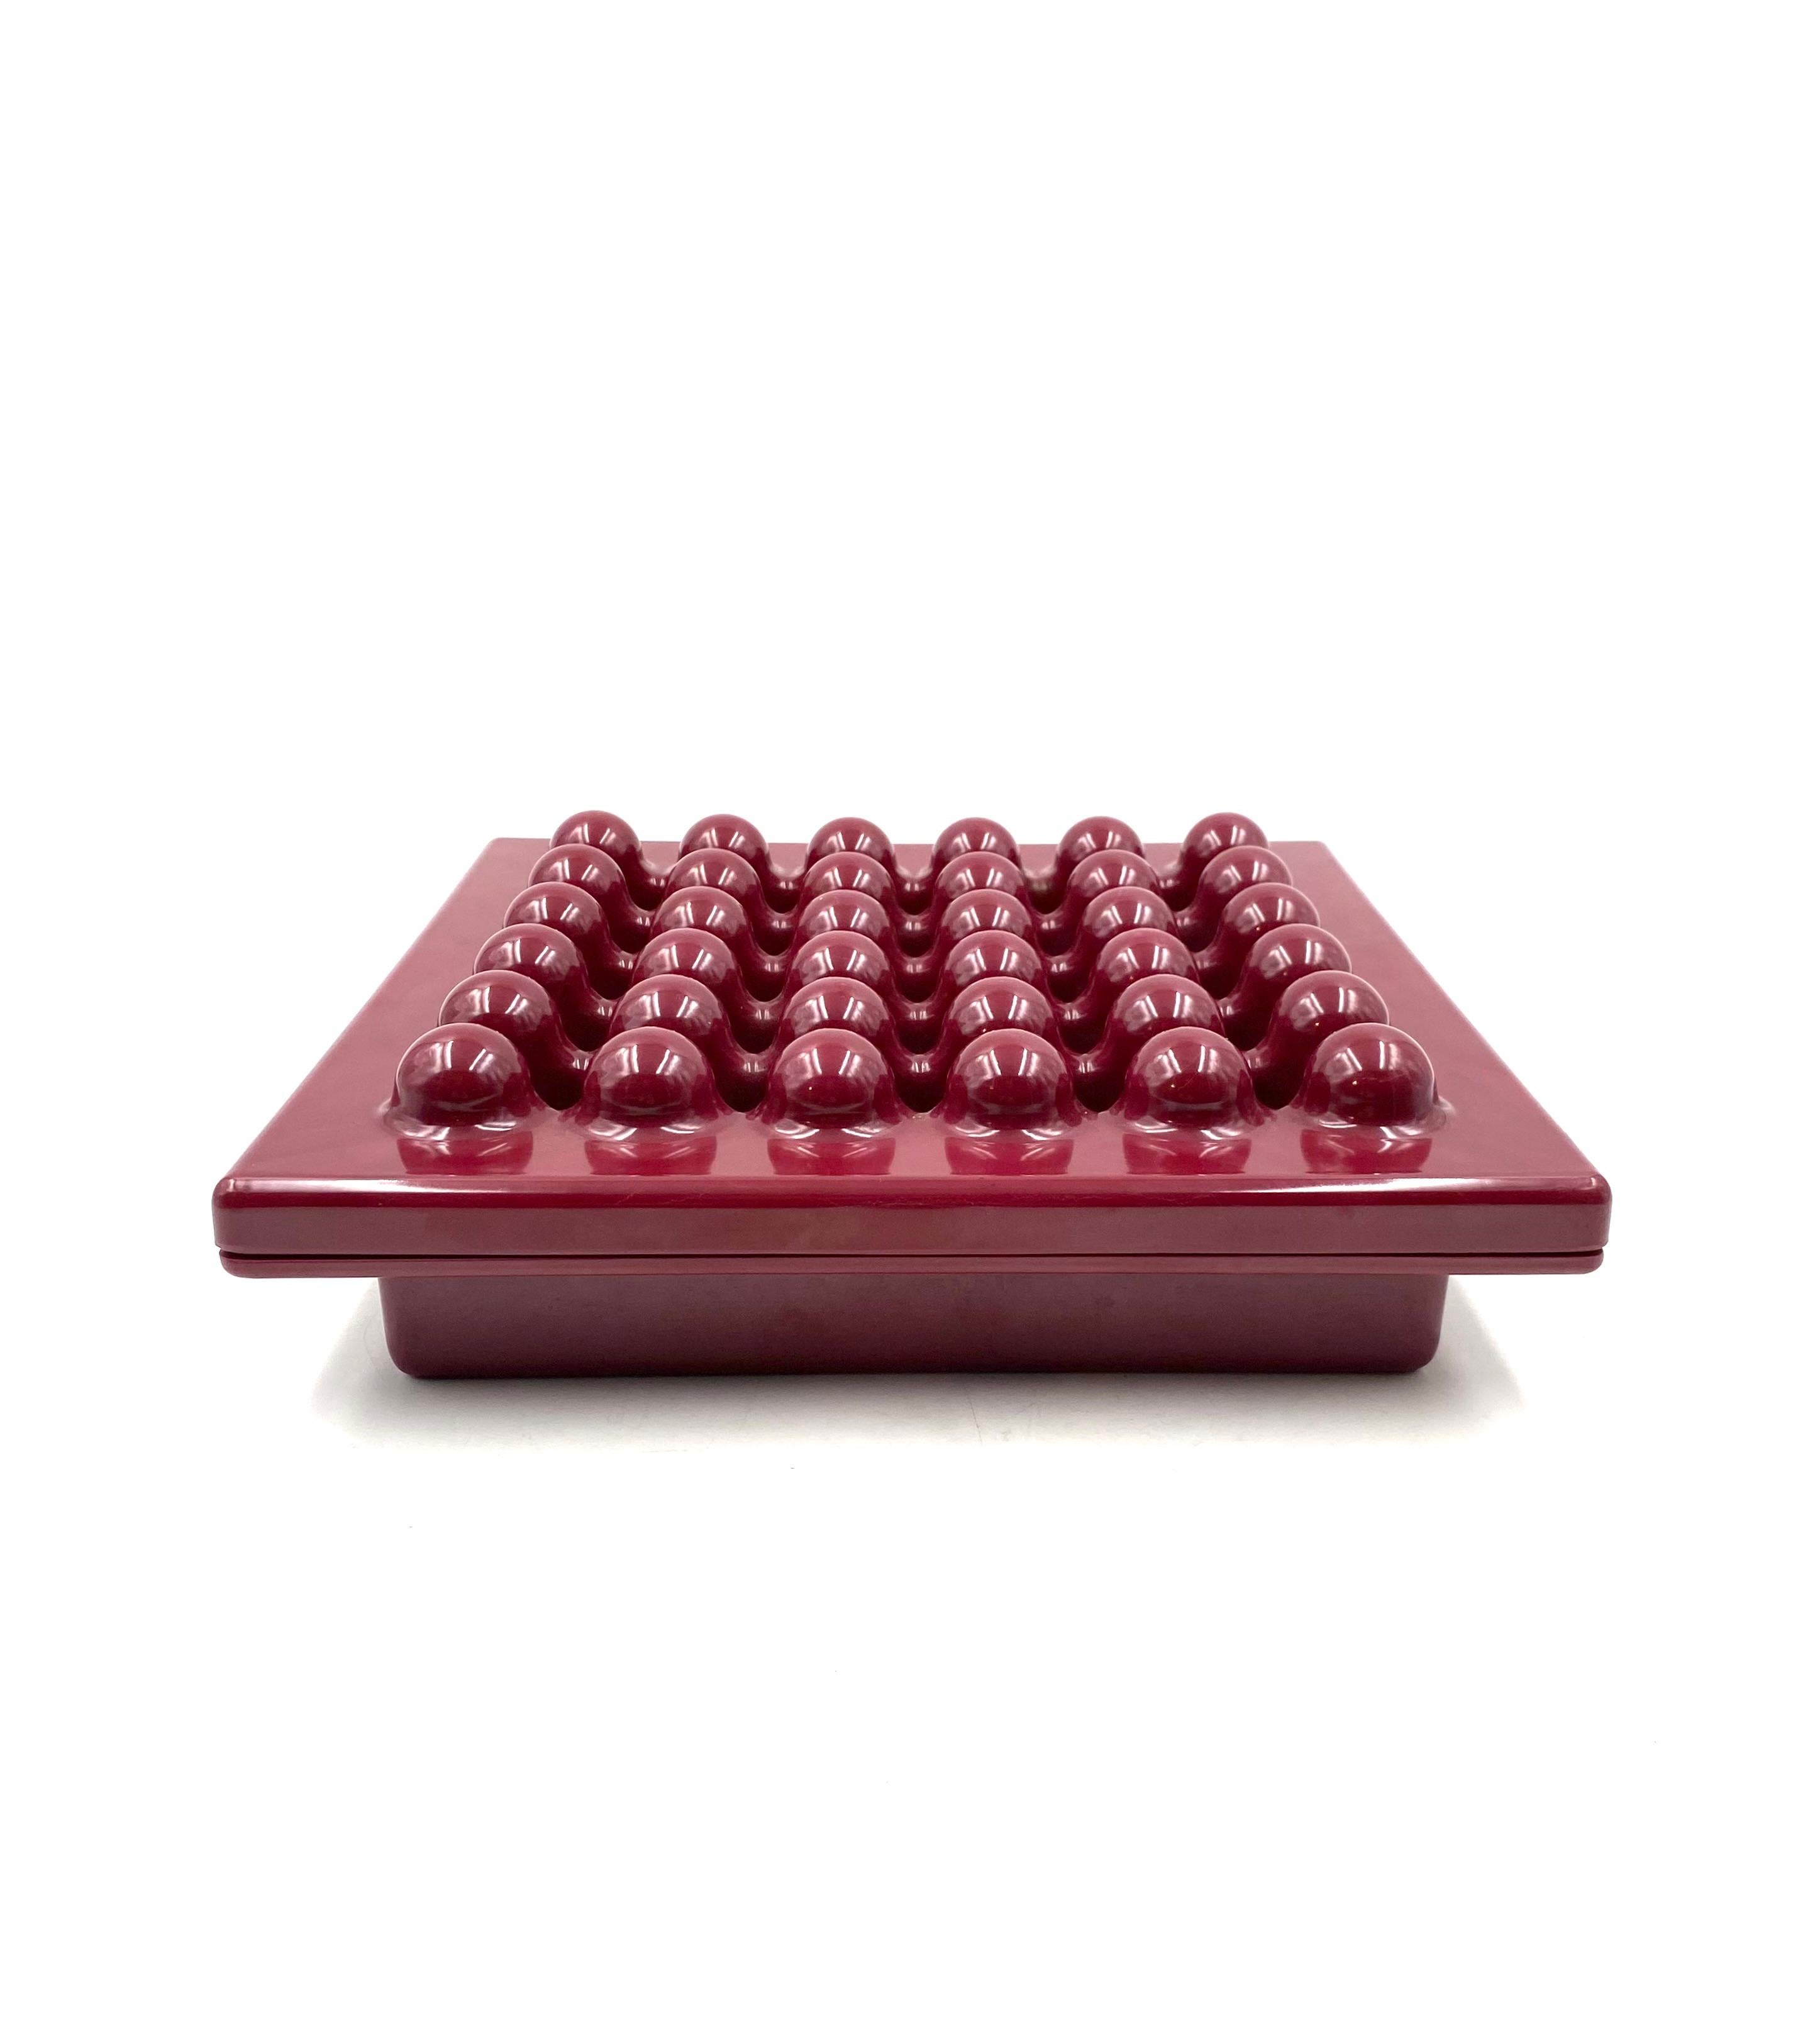 Ettore Sottsass, red big ashtray, Olivetti Synthesis, Sistema 45 series, 1971 For Sale 4